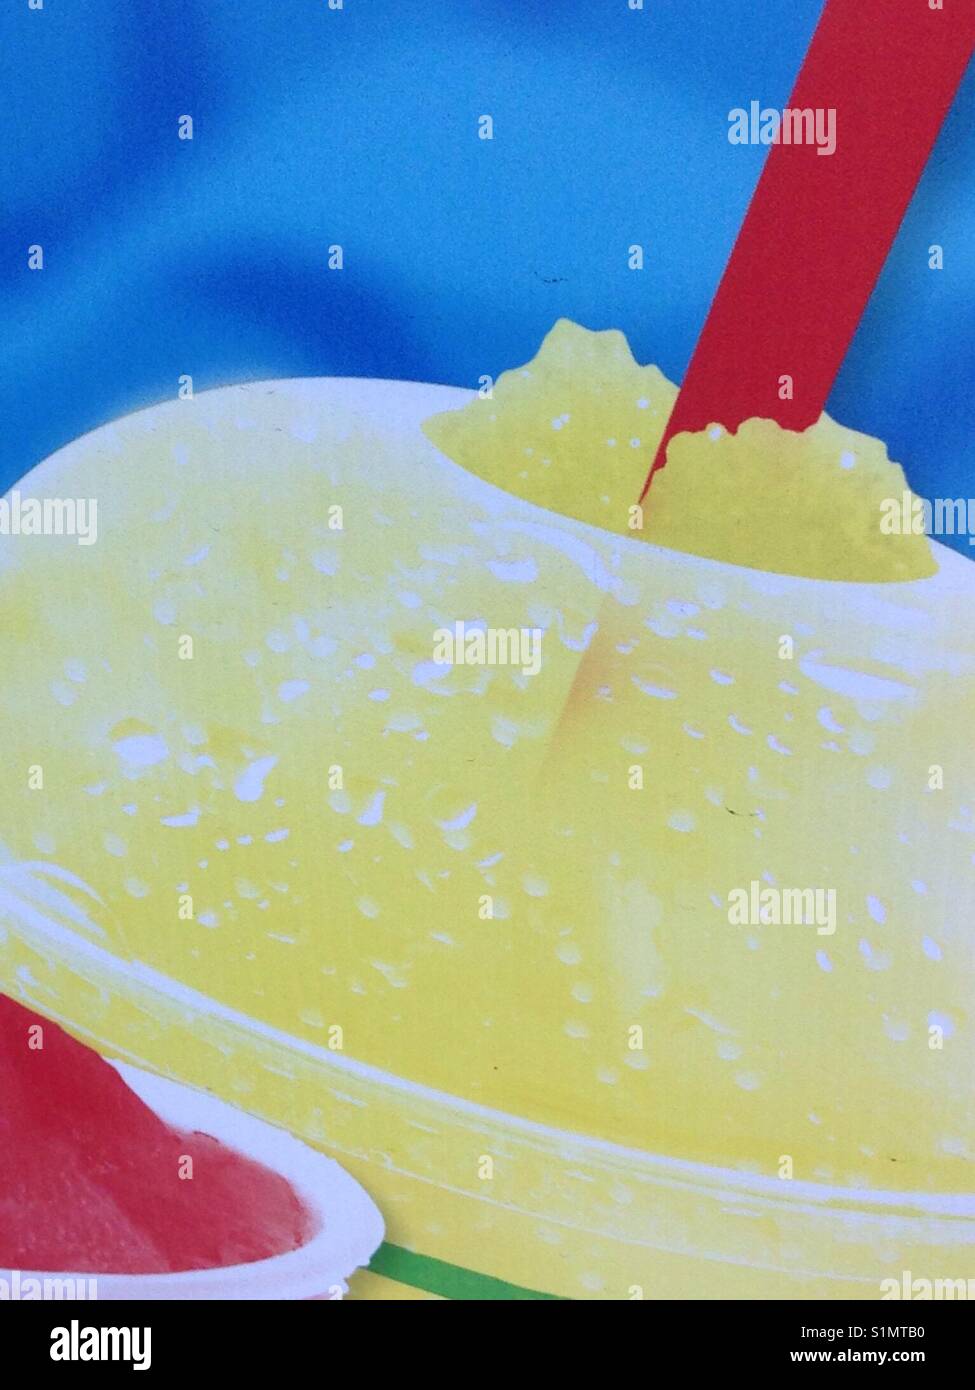 Summer - time for an Icey treat Stock Photo